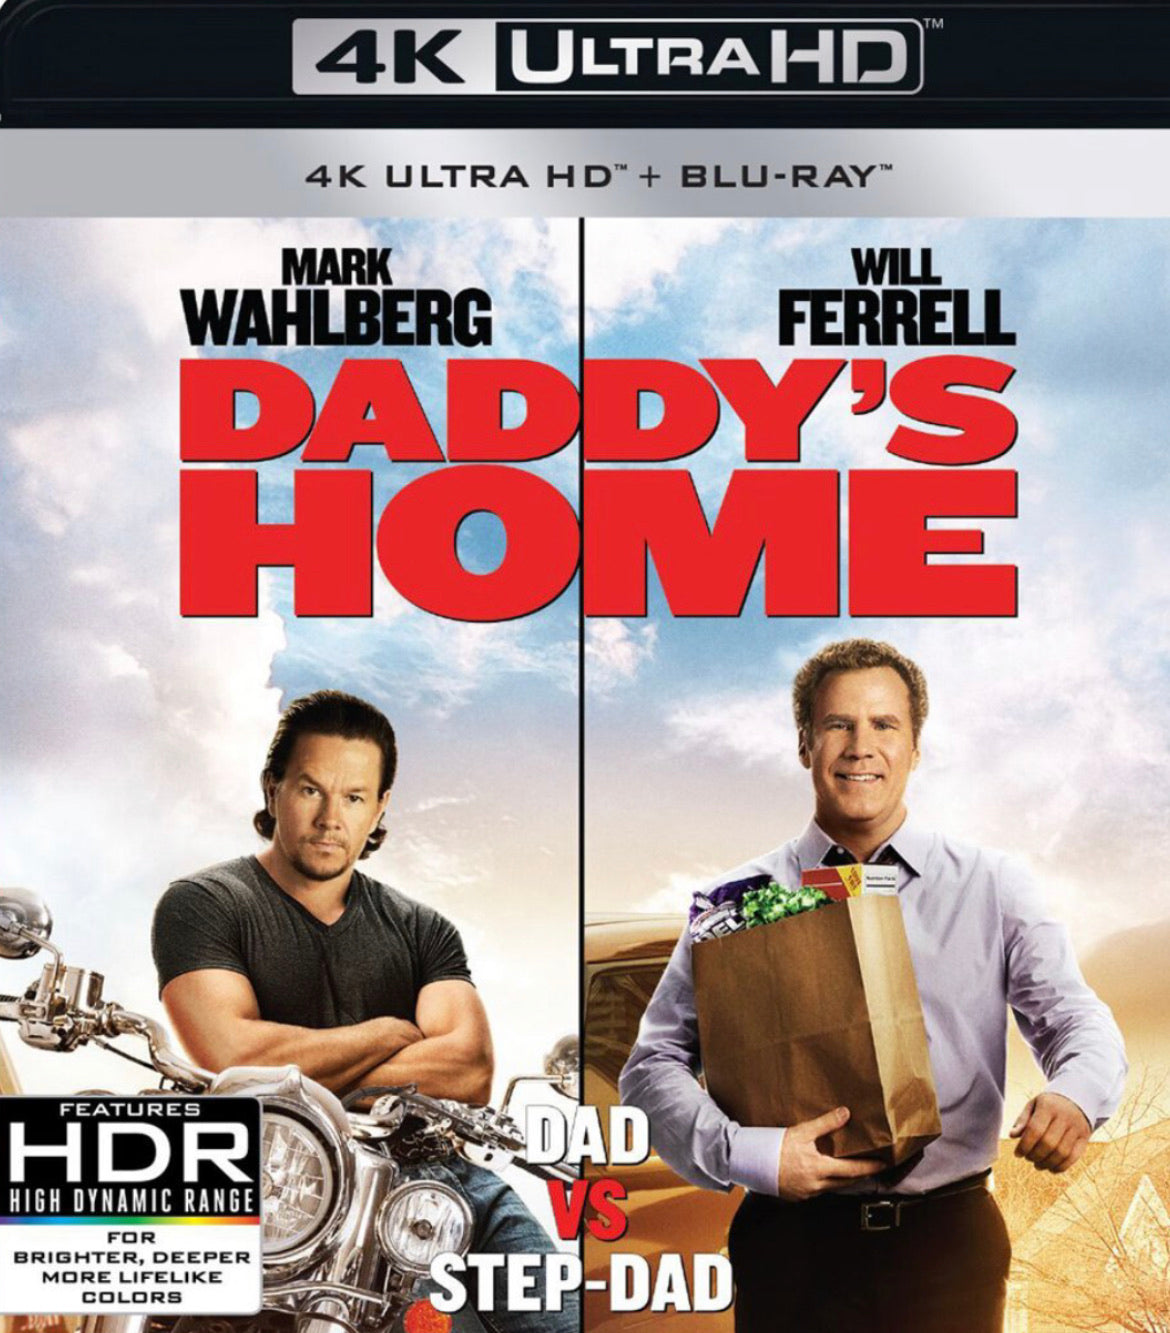 Daddy’s Home (2015) iTunes 4K redemption only